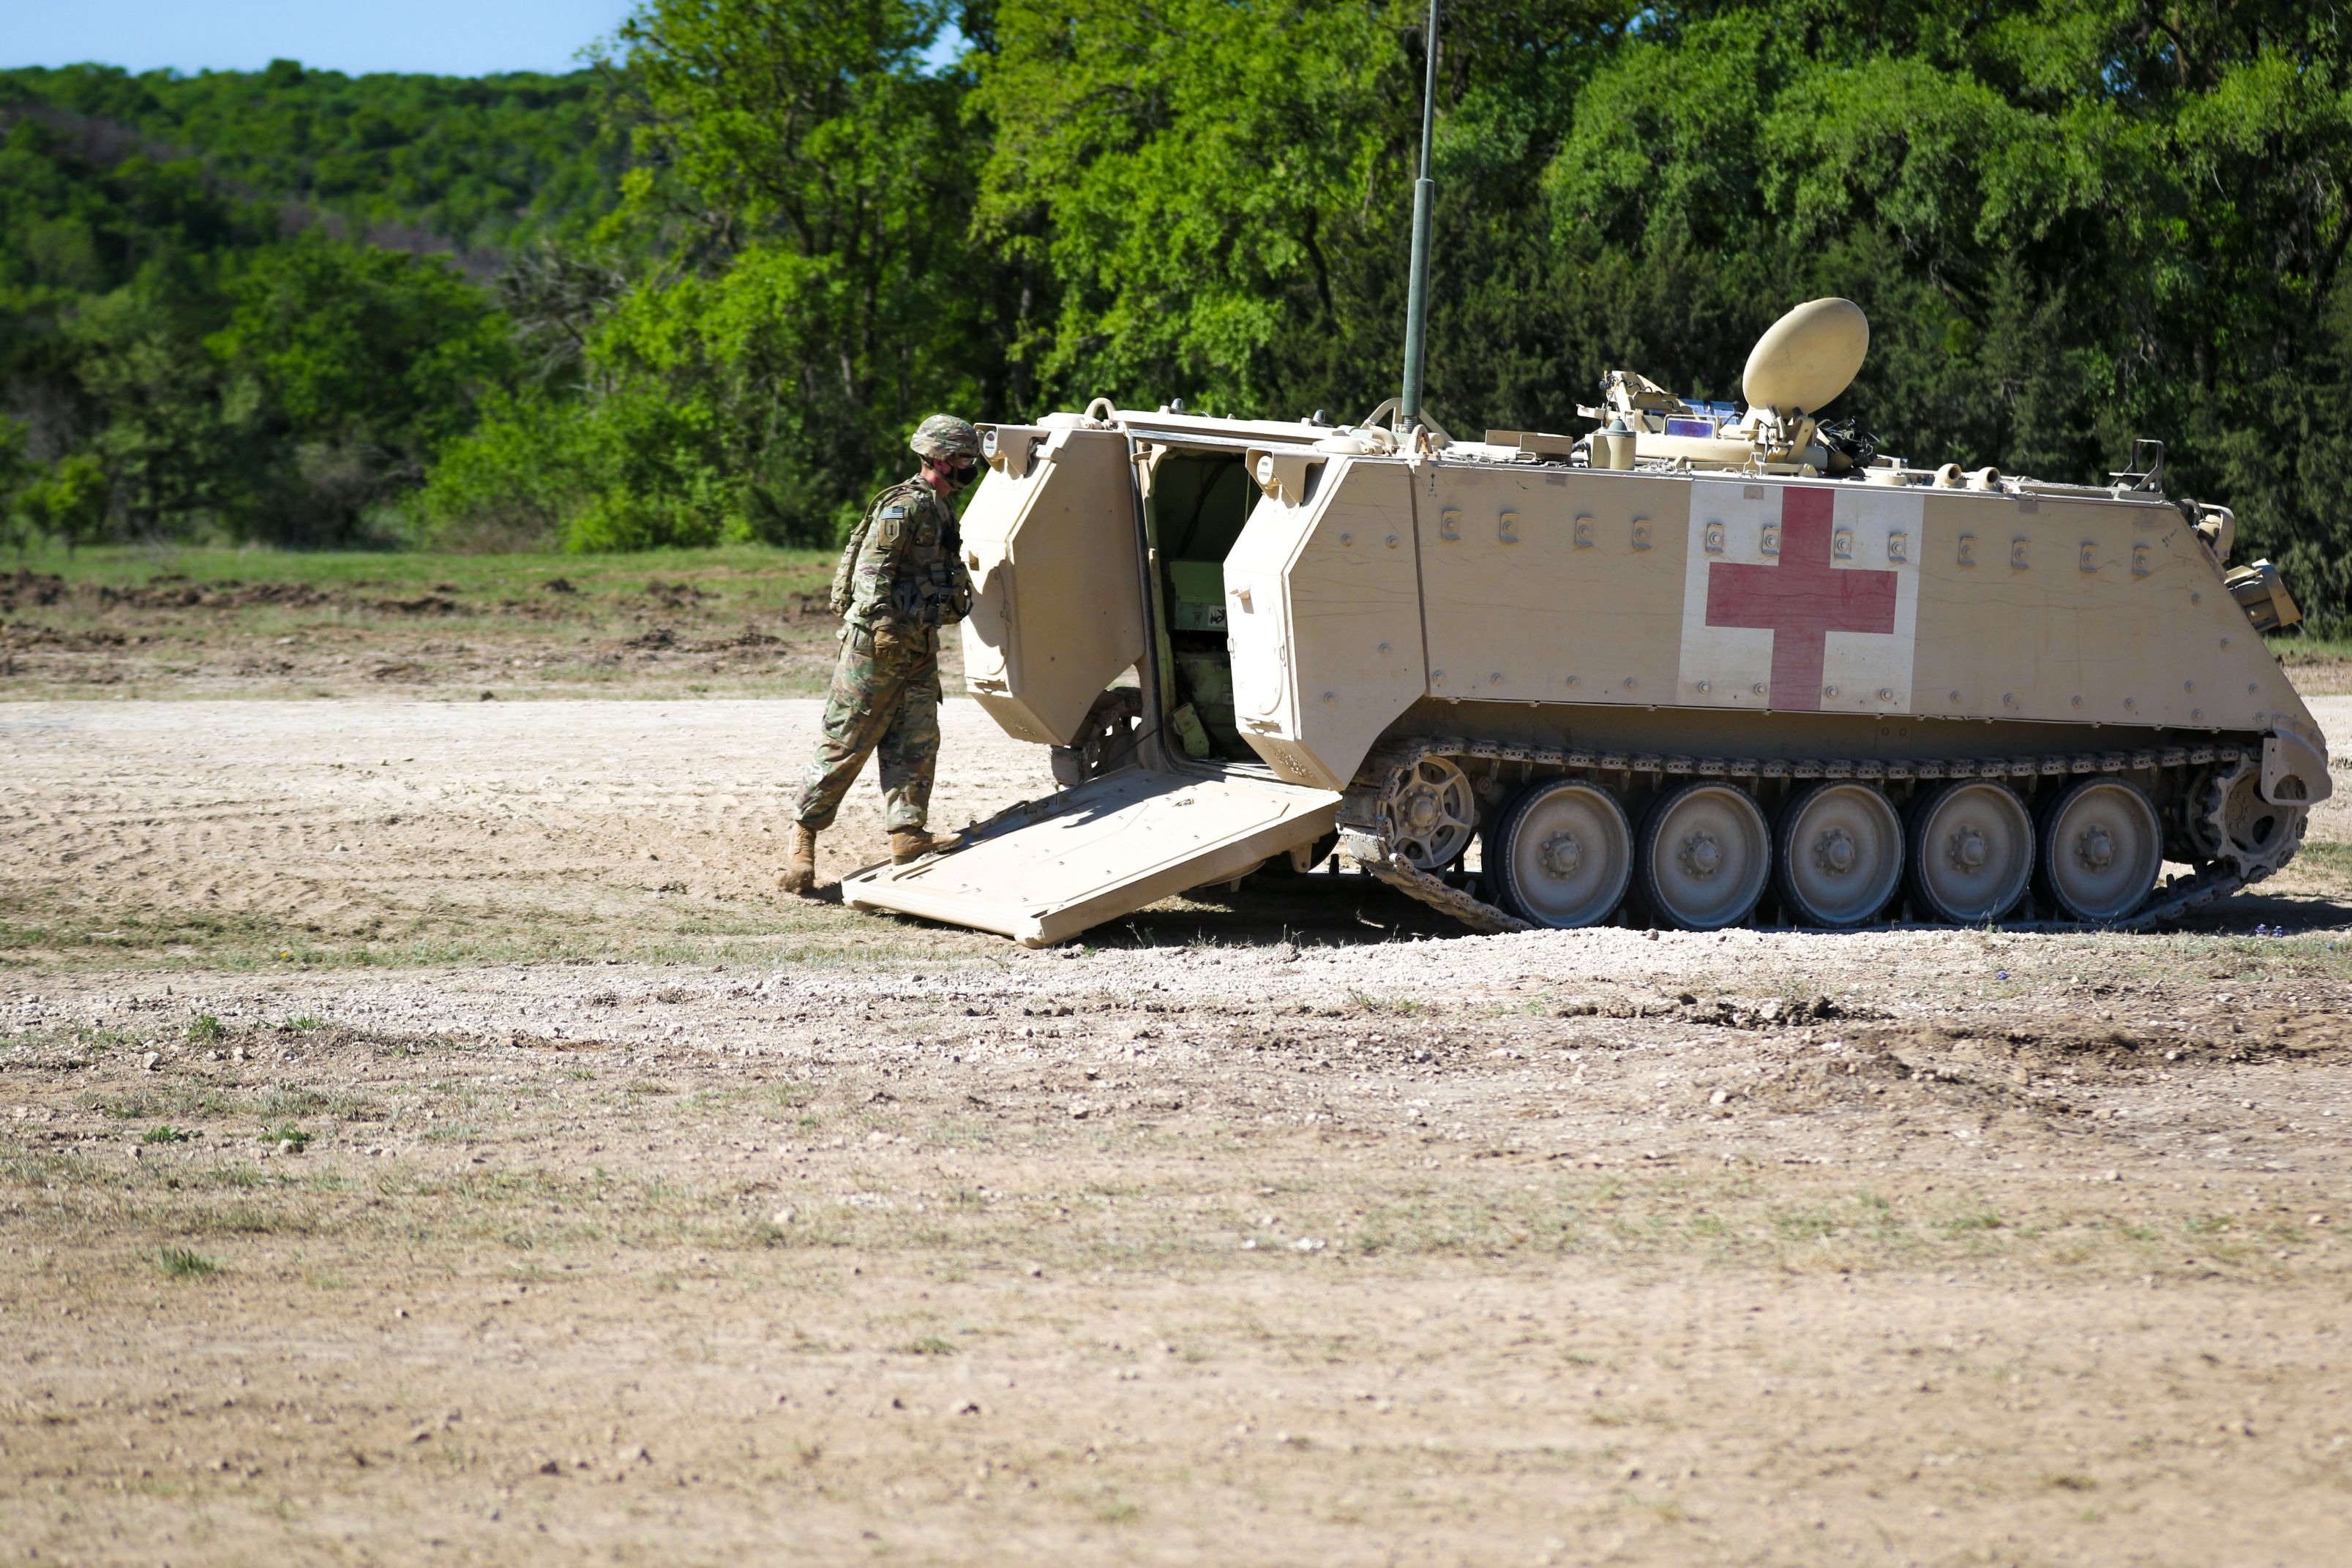 A Soldier with 1st Cavalry Division enters the M113 Ambulance during Warfighter 21-4 exercise at Fort Hood, Texas April 11, 2021. The M113 tracked ambulance has a capacity of: four litter casualties, or. ten ambulatory casualties, or. a mixed load of two litter casualties and five ambulatory casualties.(U.S. Army photo by Sgt. Melissa N. Lessard)